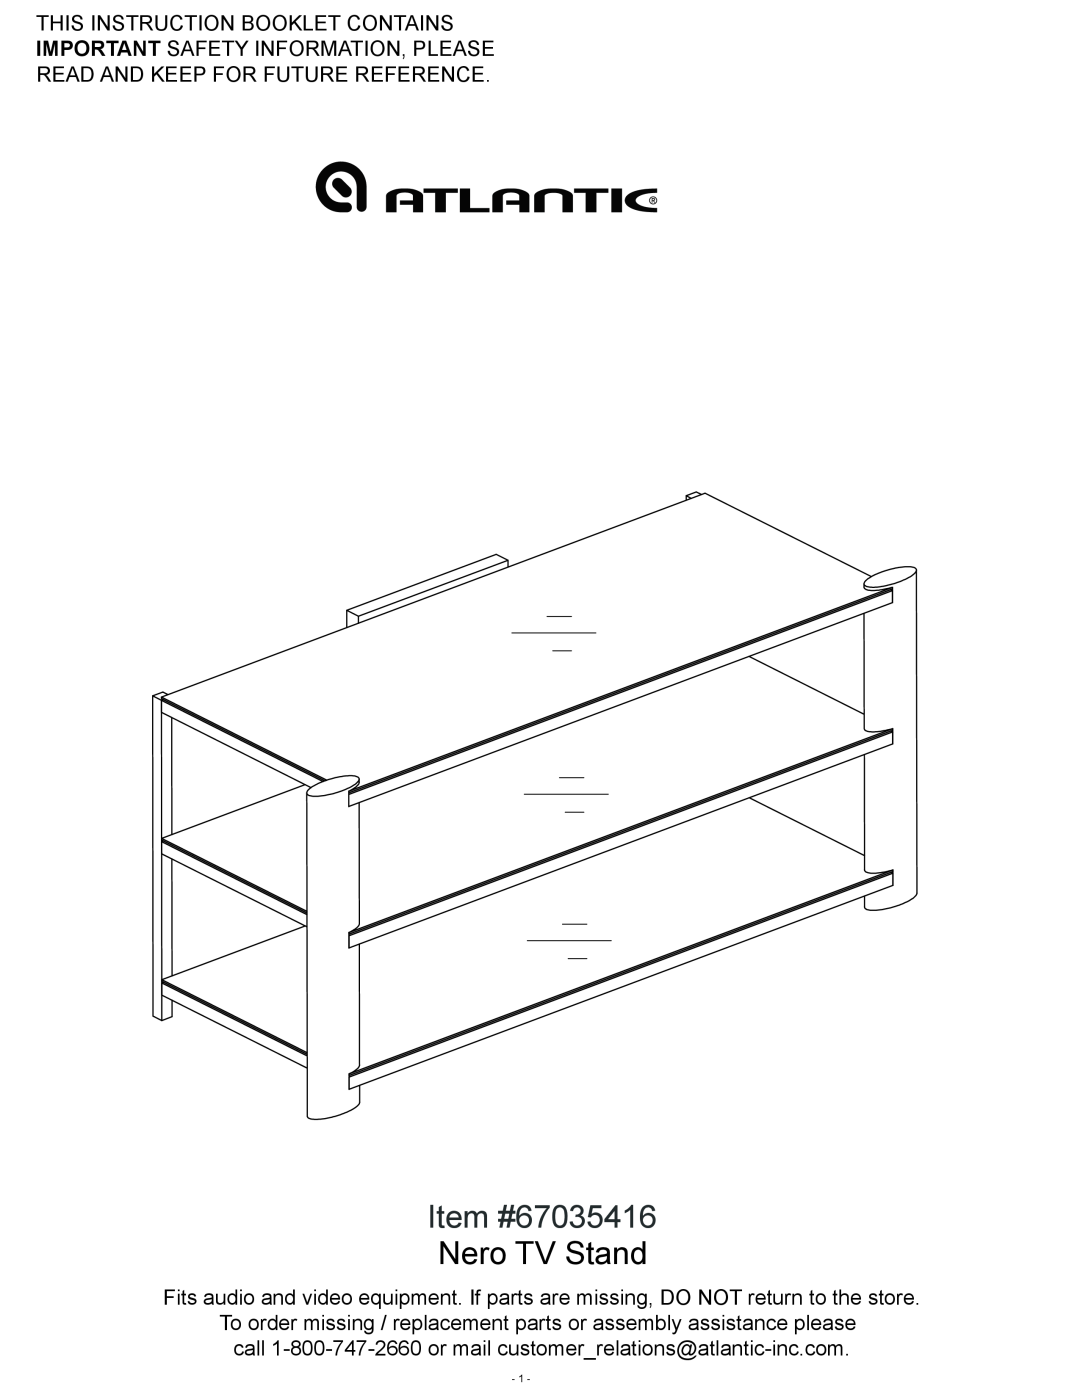 Atlantic manual Item #67035416 Nero TV Stand, This Instruction Booklet Contains, Important Safety Information, Please 